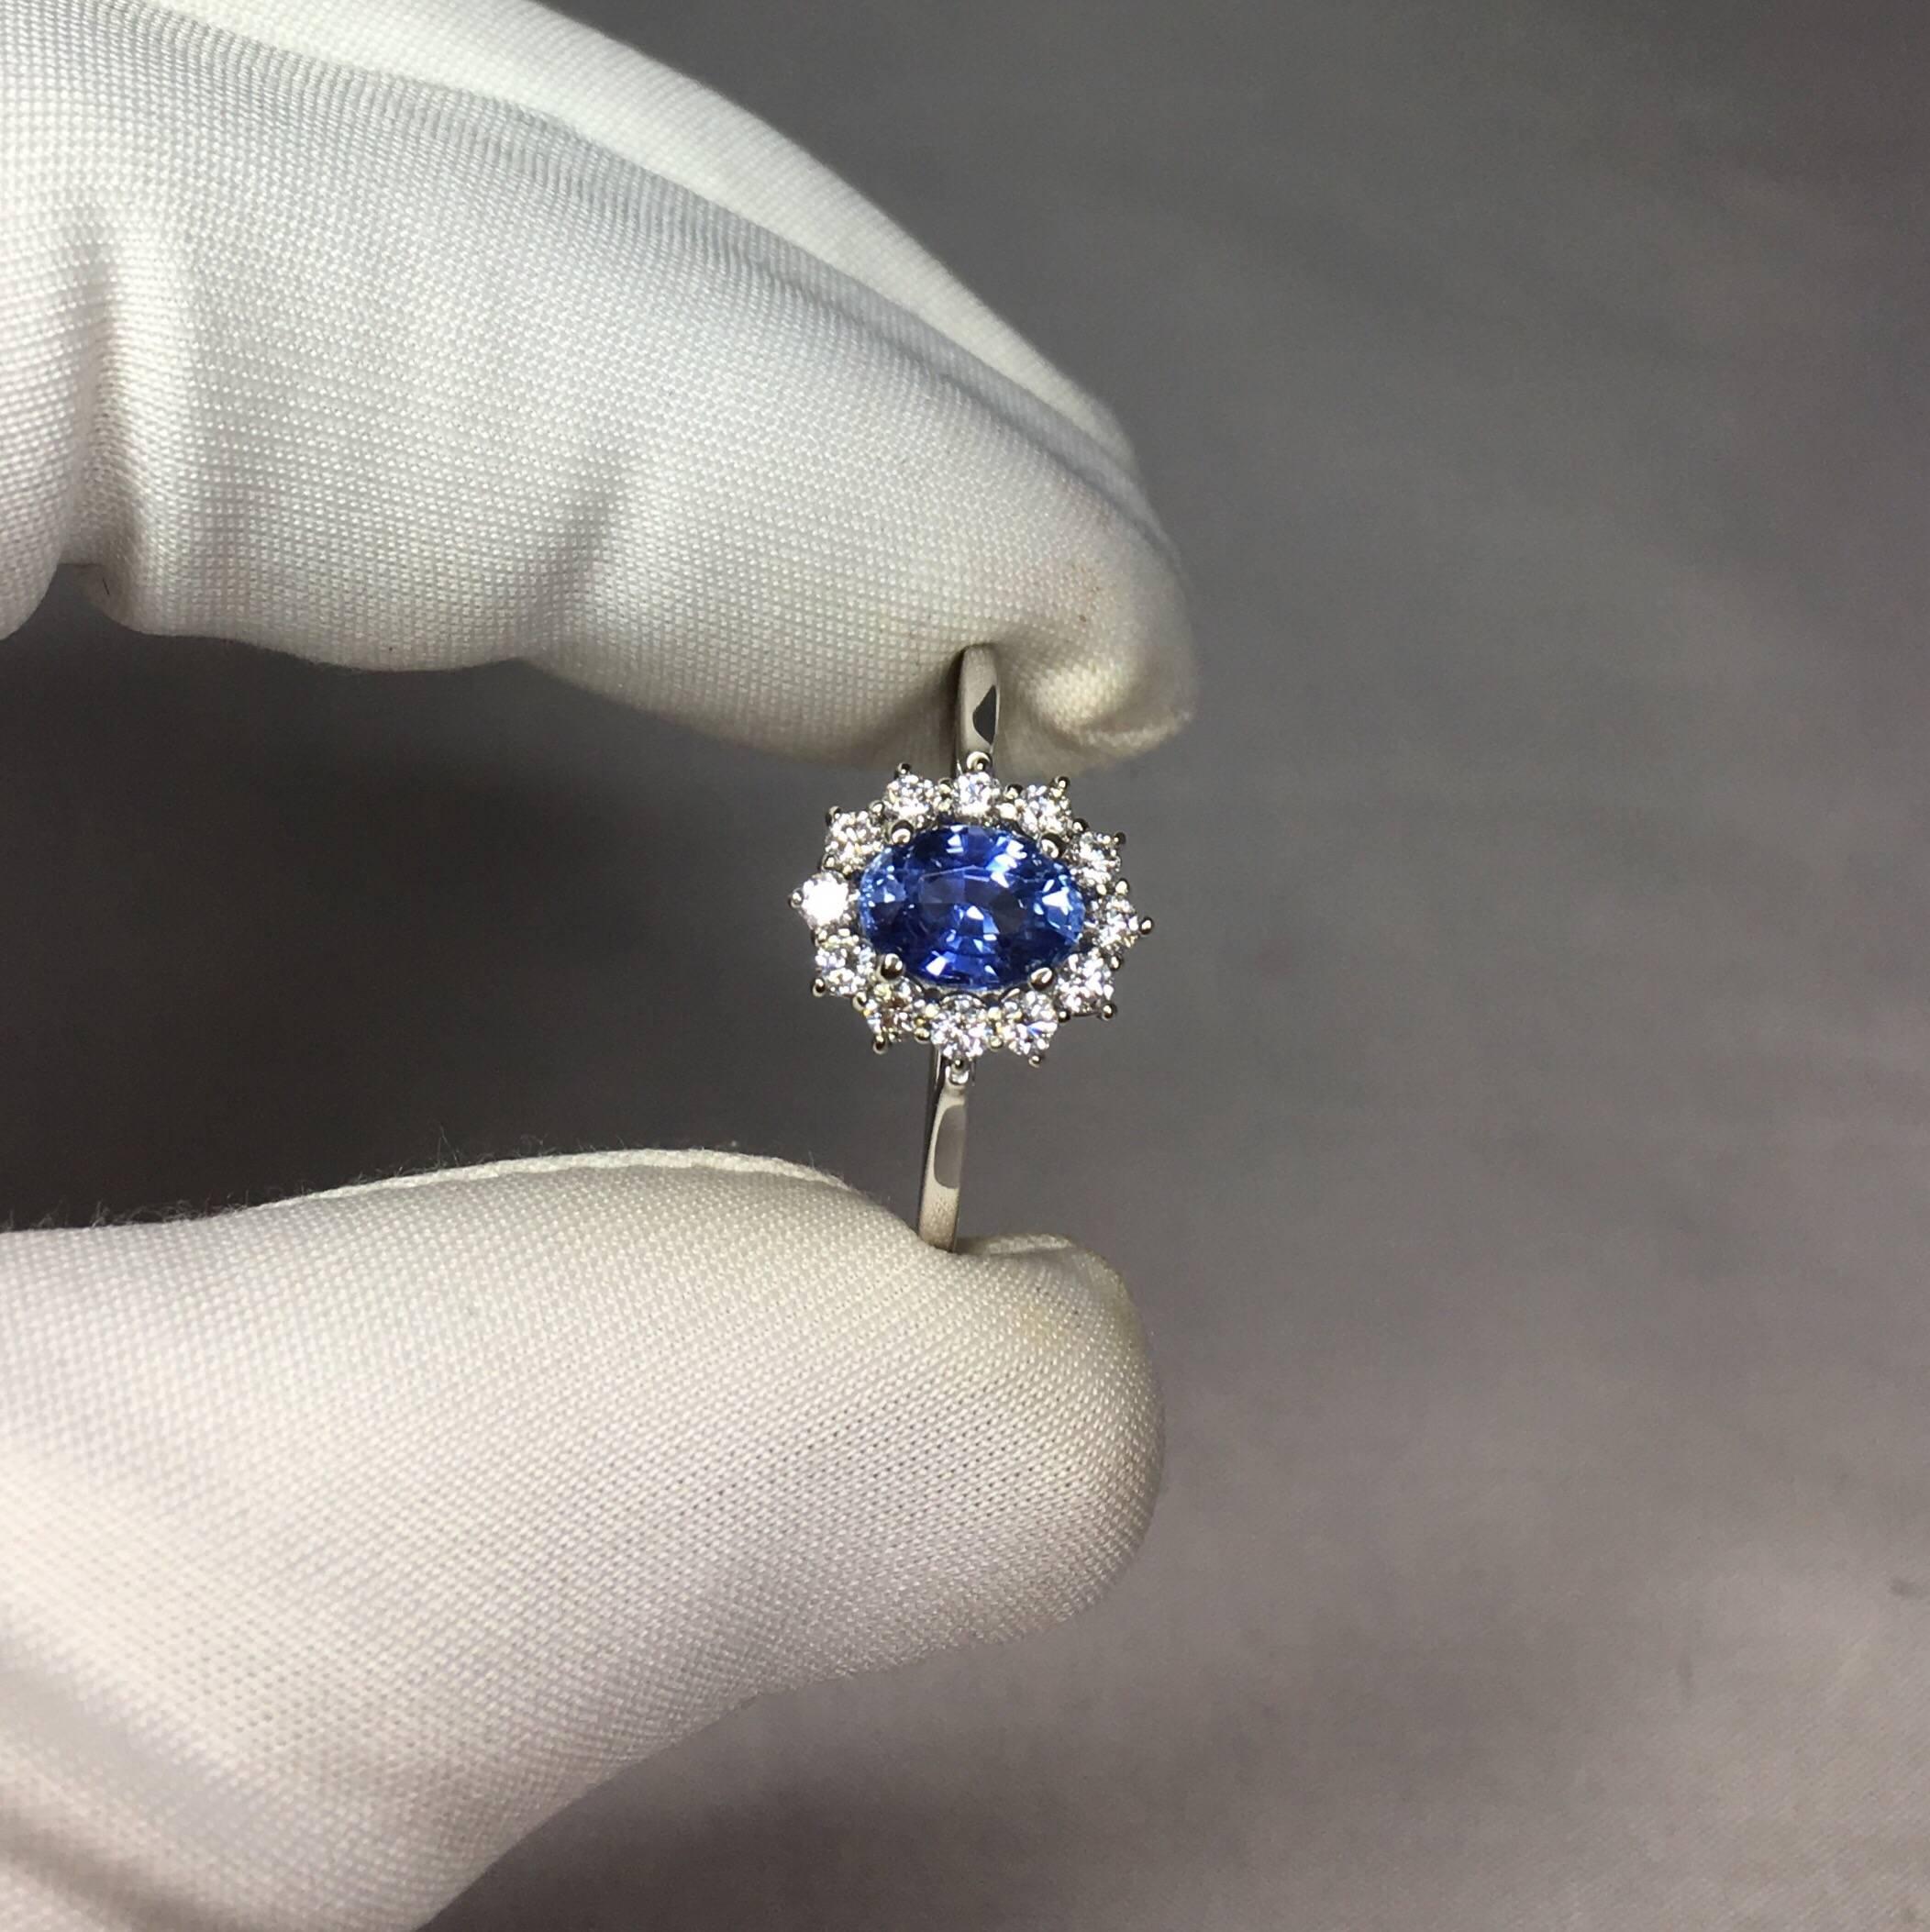 Stunning natural blue Ceylon sapphire set in a fine 18k white gold diamond halo ring. 

1.01 carat centre sapphire with fine blue colour and excellent clarity.

Fully certified by GIA, confirming stone as natural, untreated/unheated and Ceylon/Sri